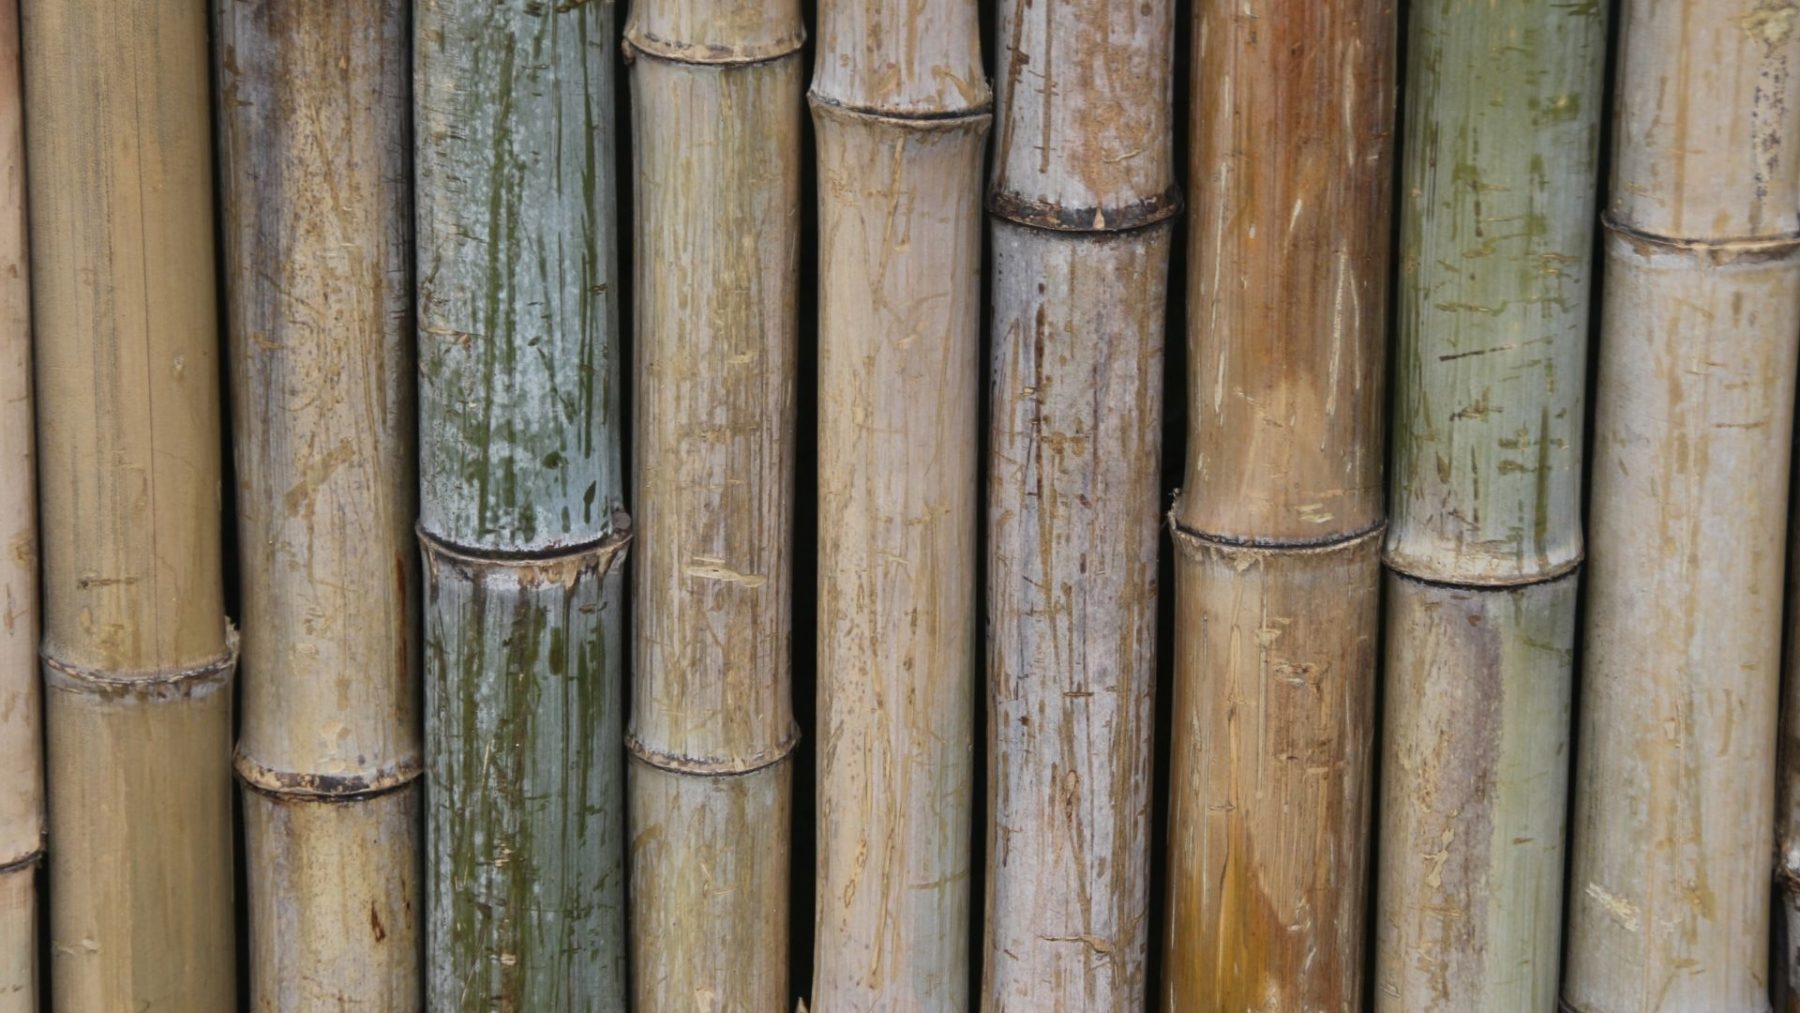 Bamboo is beneficial